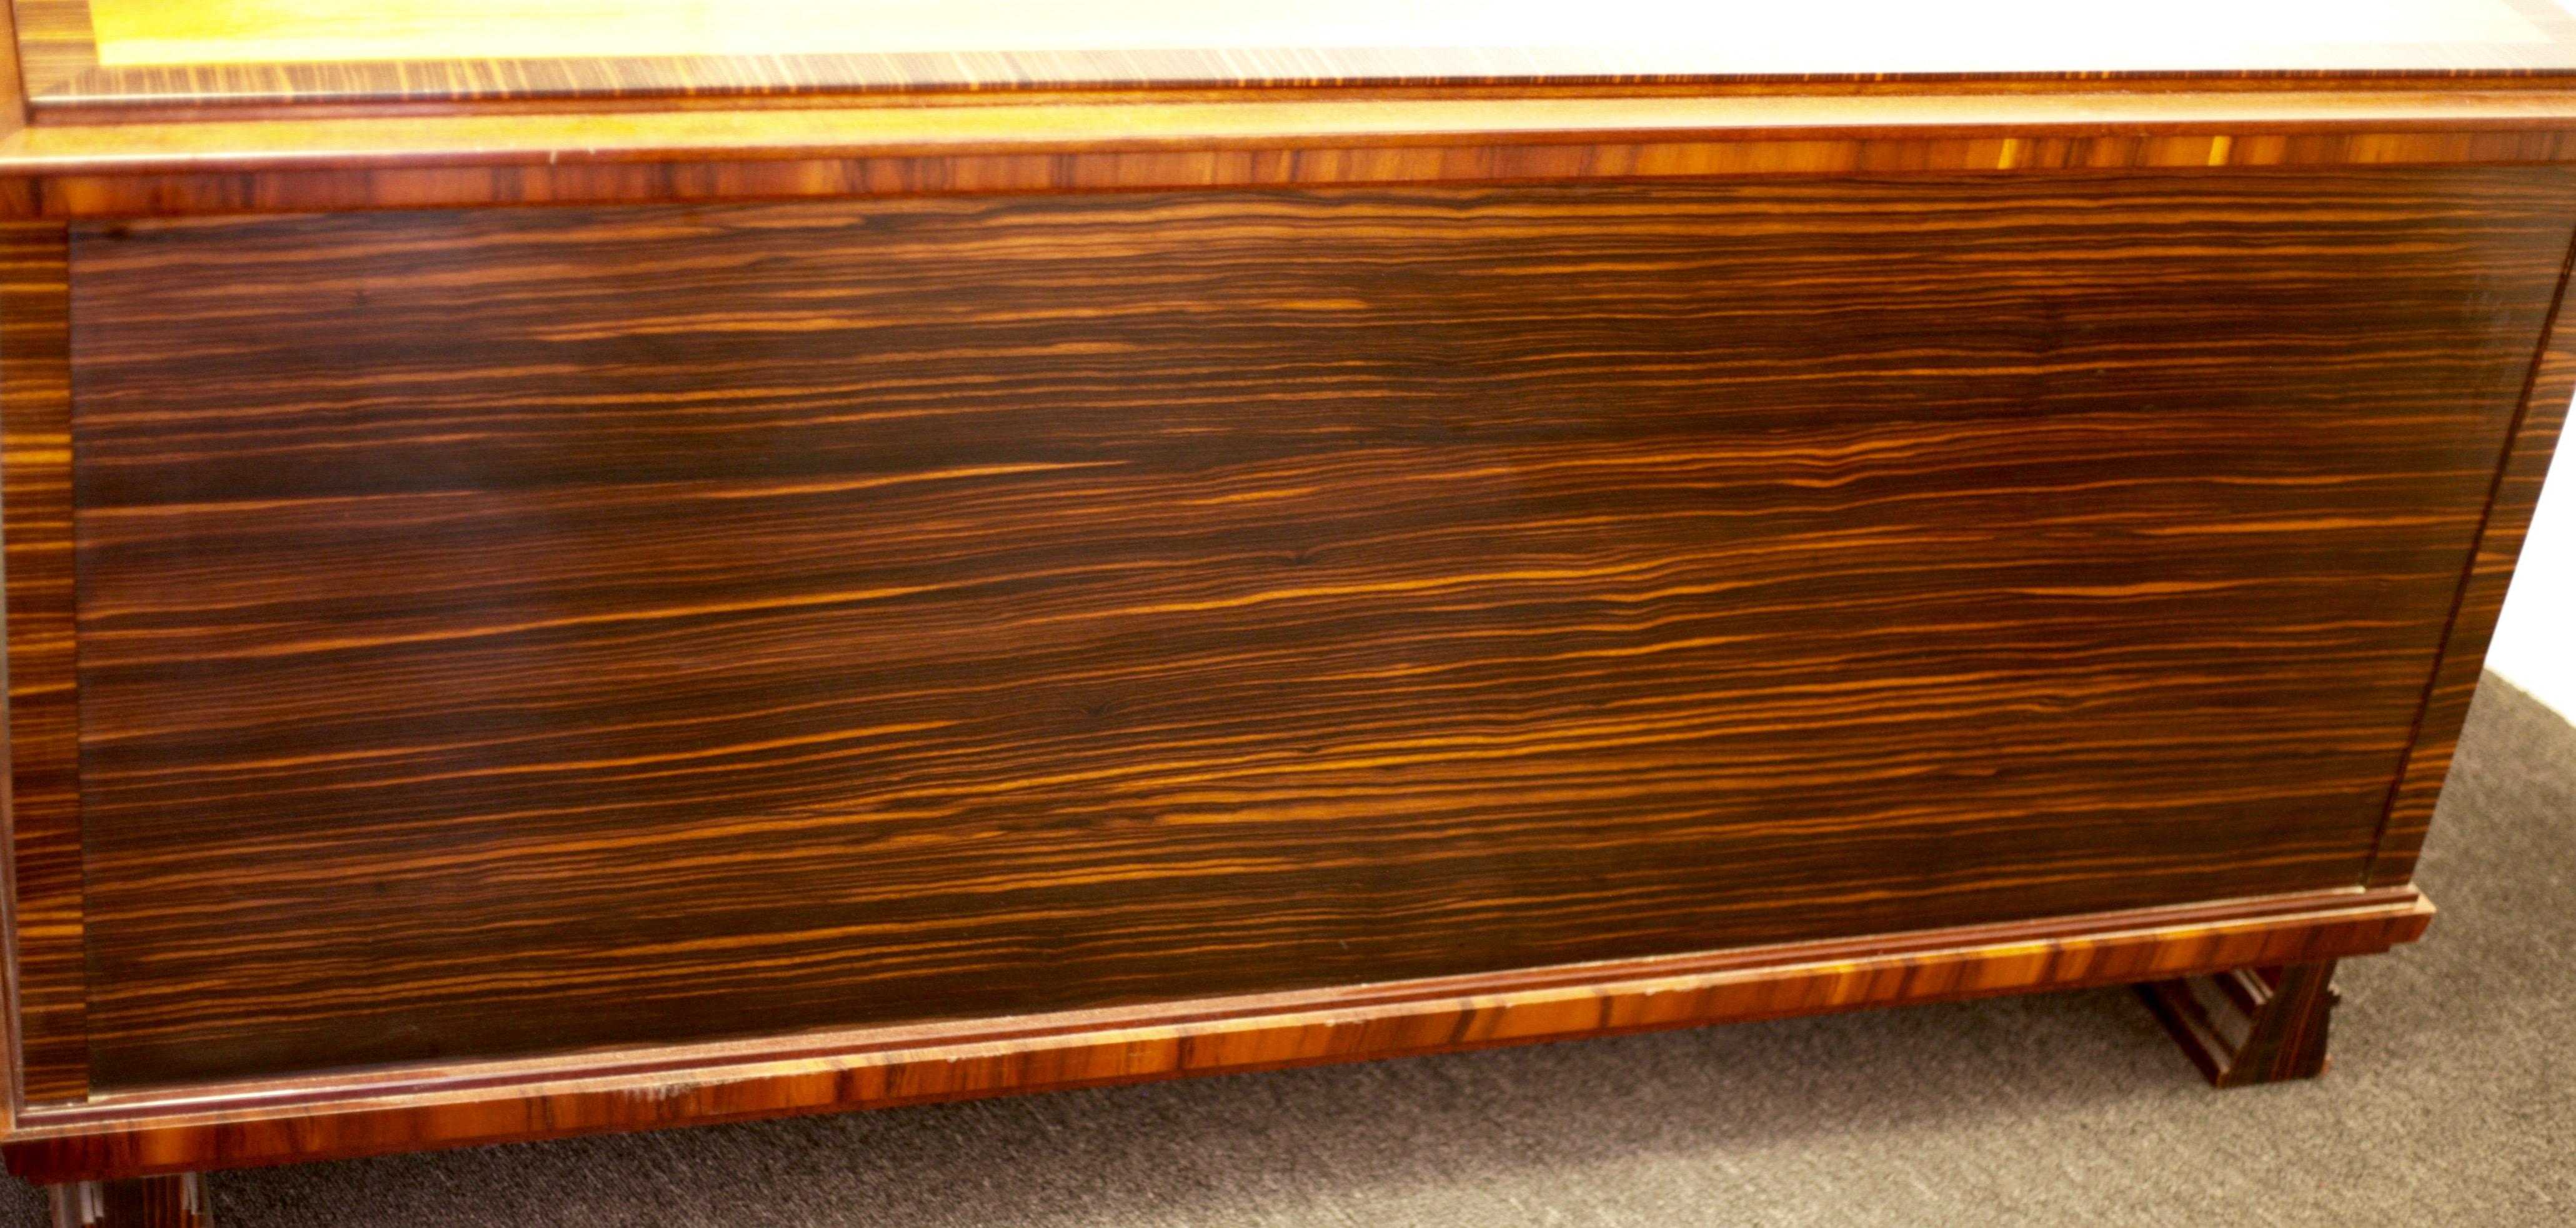 Swedish Grace - 1920s Art Deco Sideboard in the Manner of Carl Malmsten For Sale 4